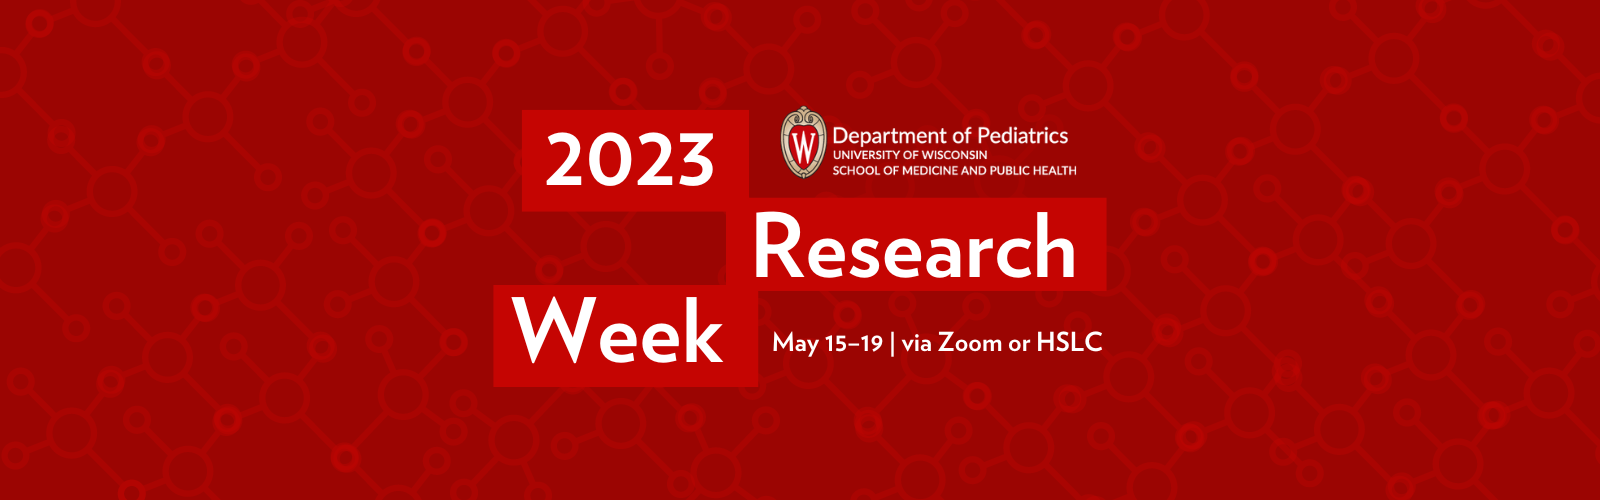 2023 Research Week. Department of Pediatrics. May 15-29 via Zoom or Health Sciences Learning Center